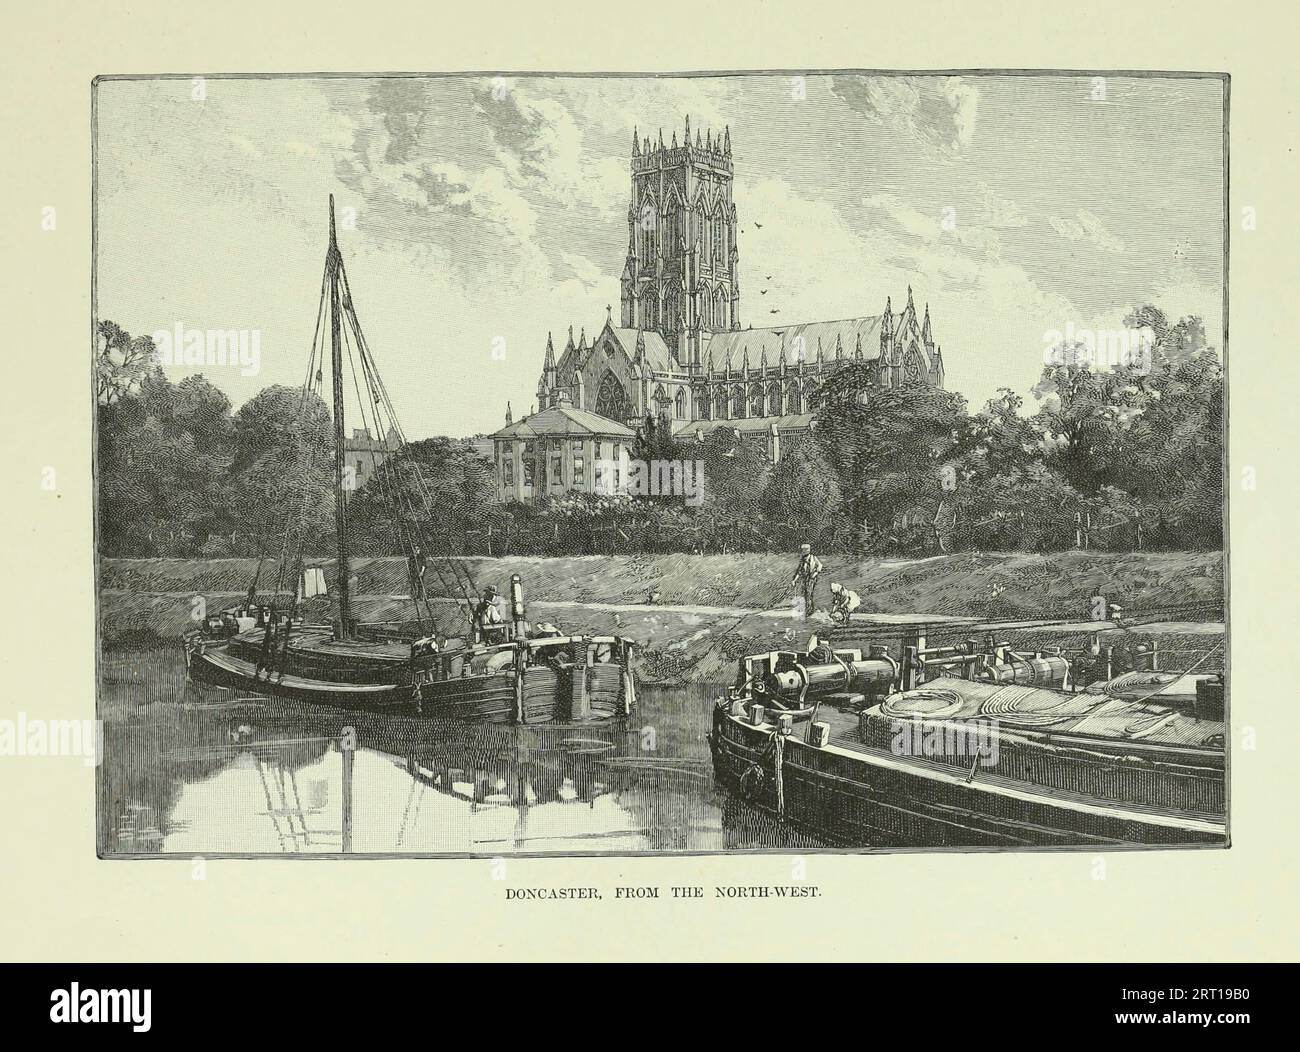 Doncaster ist eine Stadt in South Yorkshire, England. Benannt nach dem River Don, aus dem Buch Cathedrals, Abbeys and Churches of England and Wales : Descriptive, Historical, Pictorial von Bonney, T. G. (Thomas George), 1833-1923; Publisher London : Cassell 1890 Stockfoto